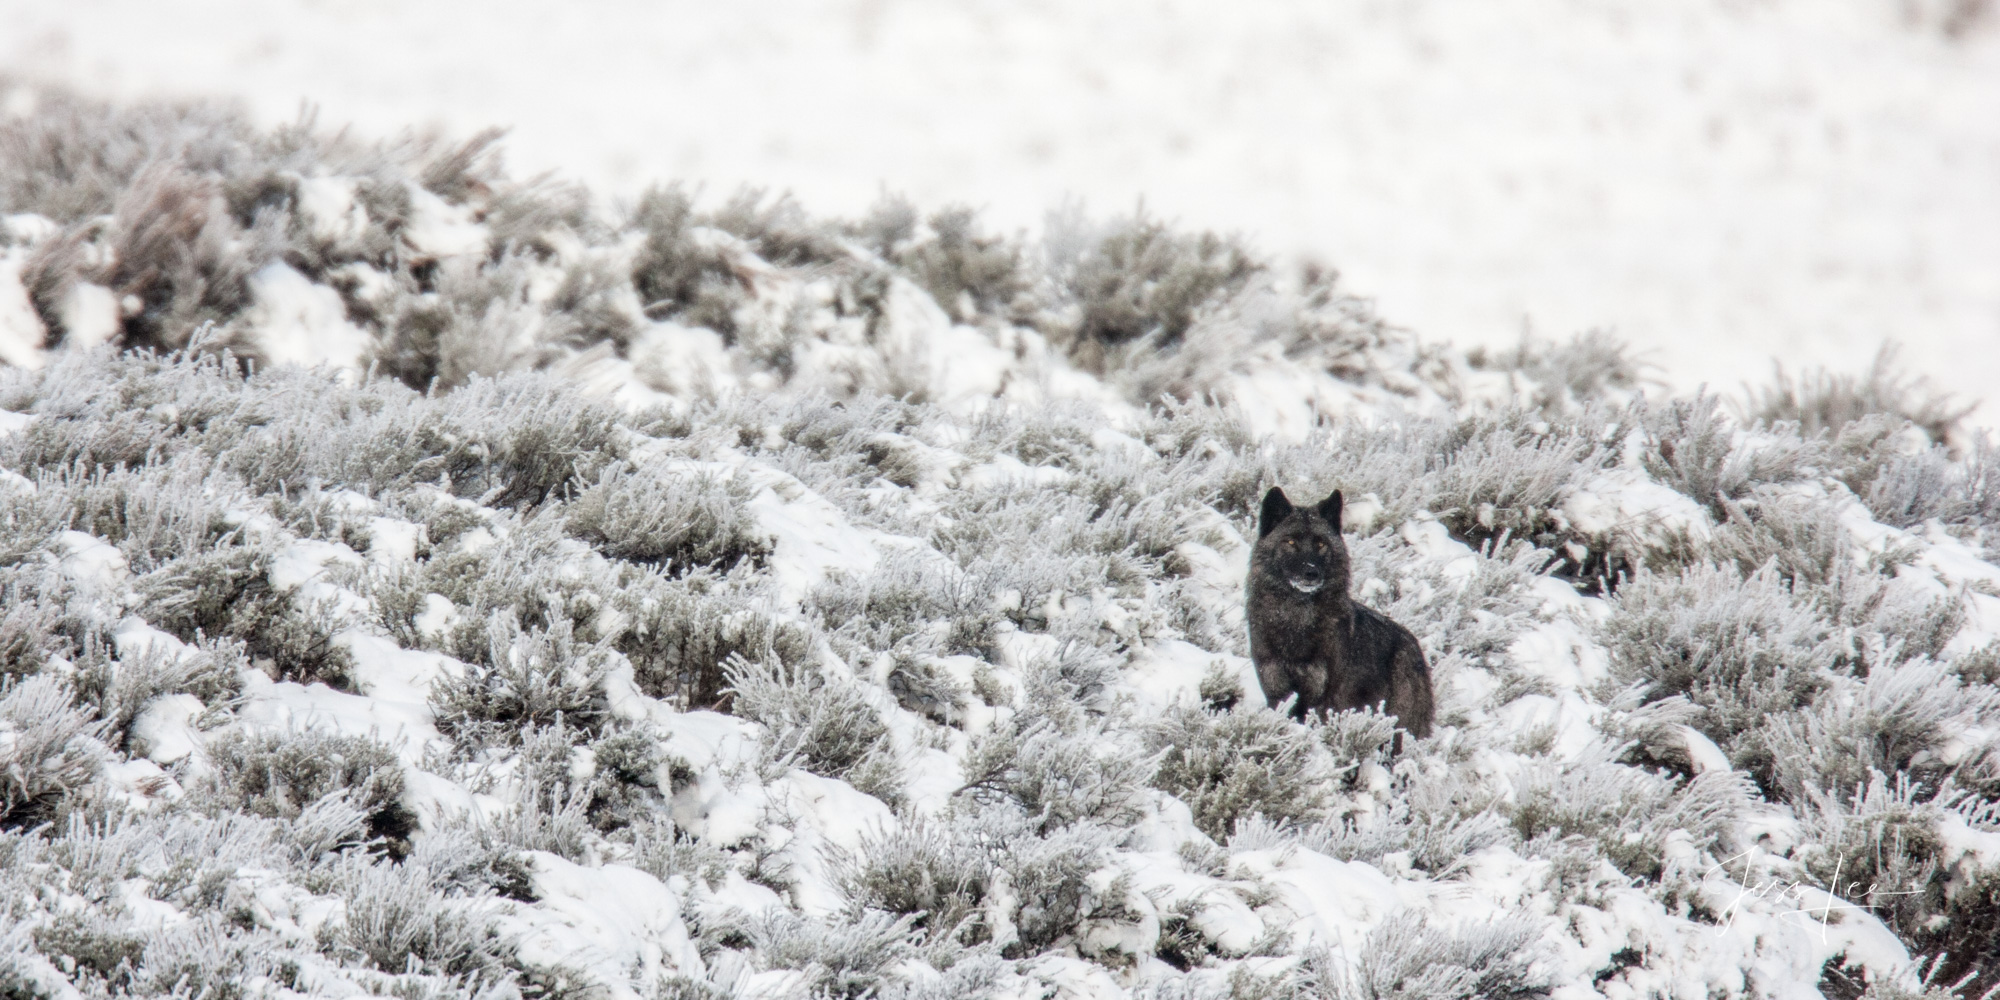 YellowstoneHunting  Wolf in the Wild. Exclusive limited edition photo of 200 prints by Jess Lee